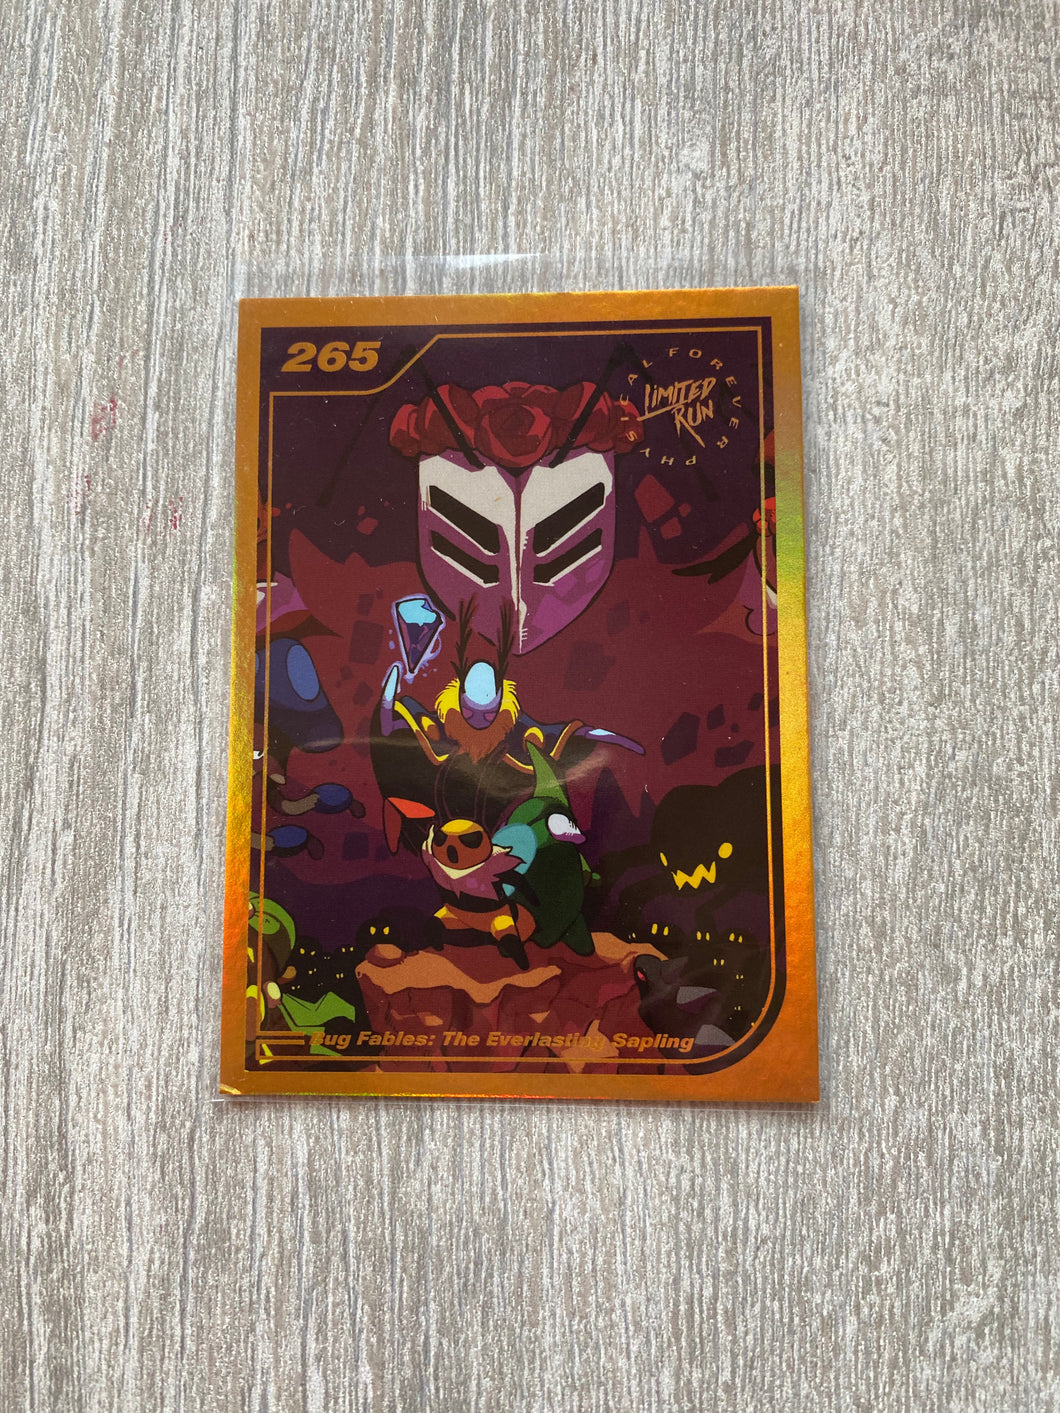 Gen2 #265 Gold Bug fables Everlasting sapling Limited run games Trading card